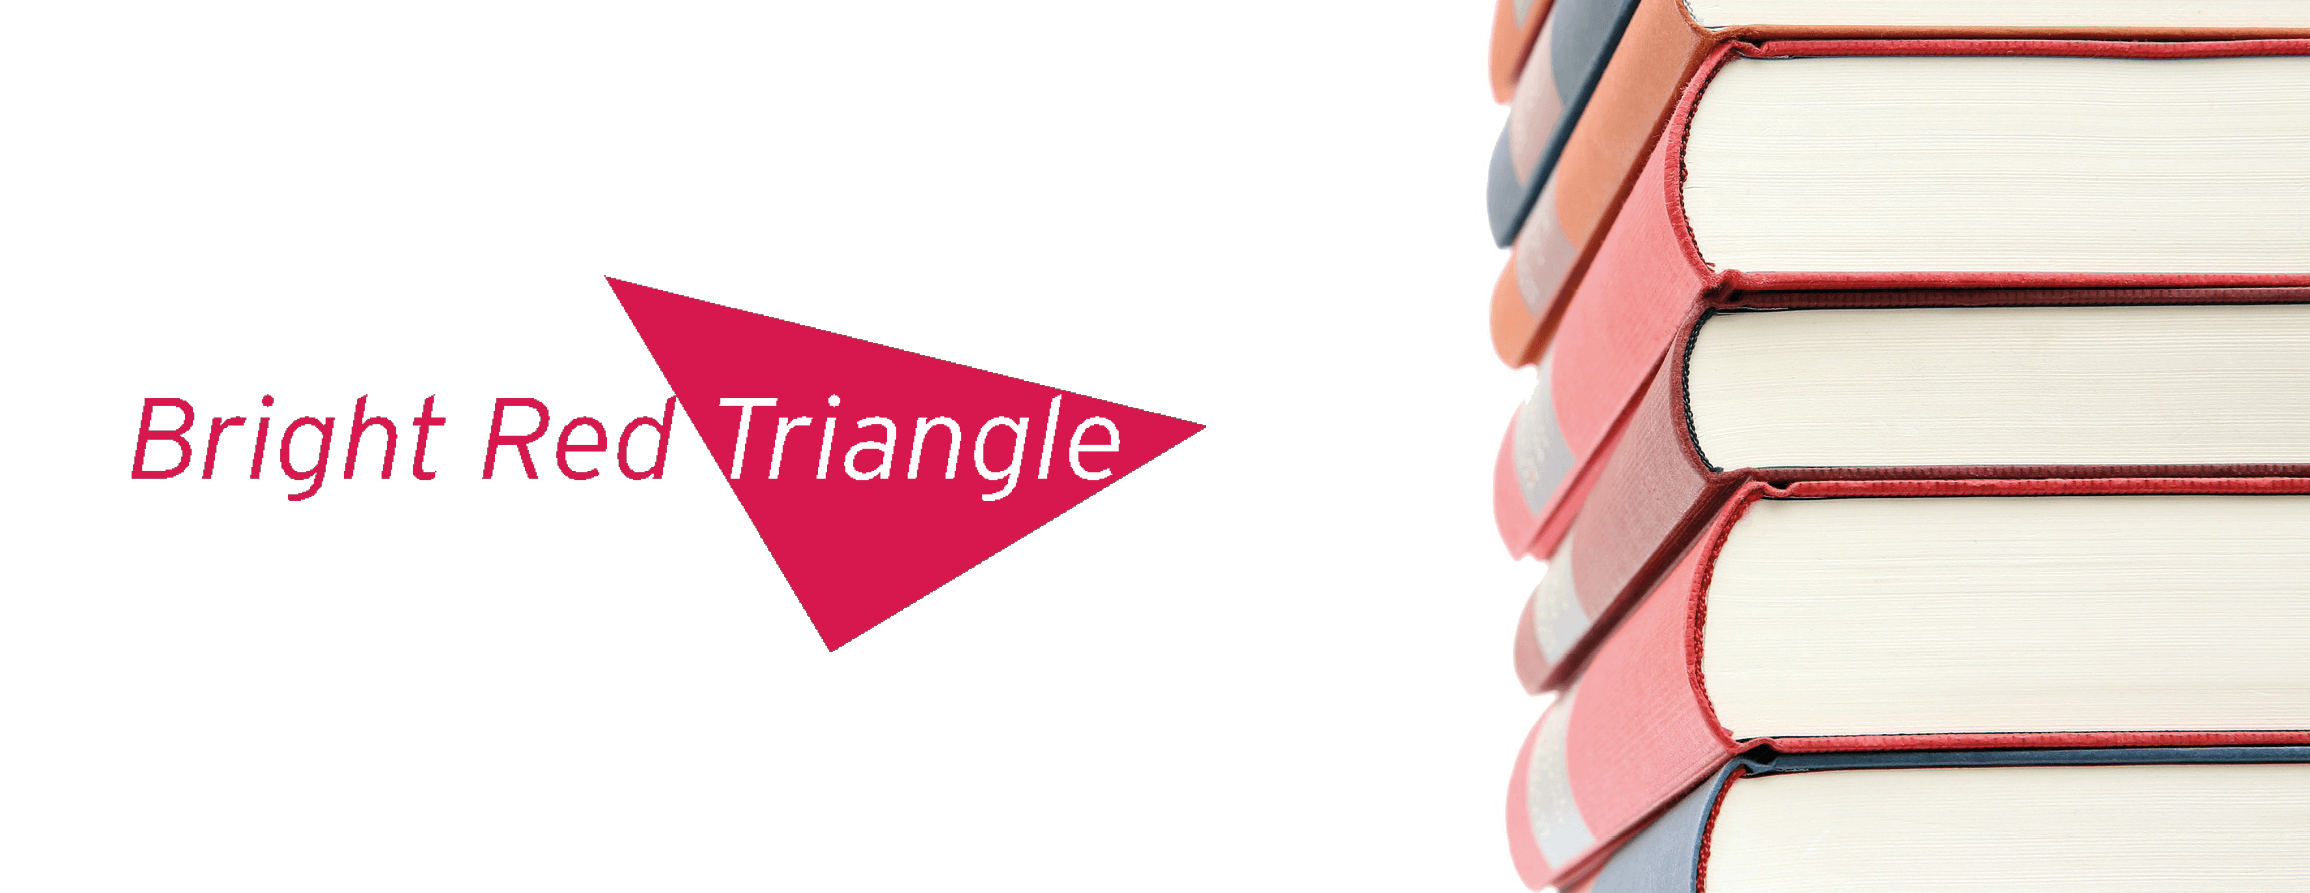 Red Triangle Logo - Facebook-BRTBookClub-CoverImage - Bright Red Triangle